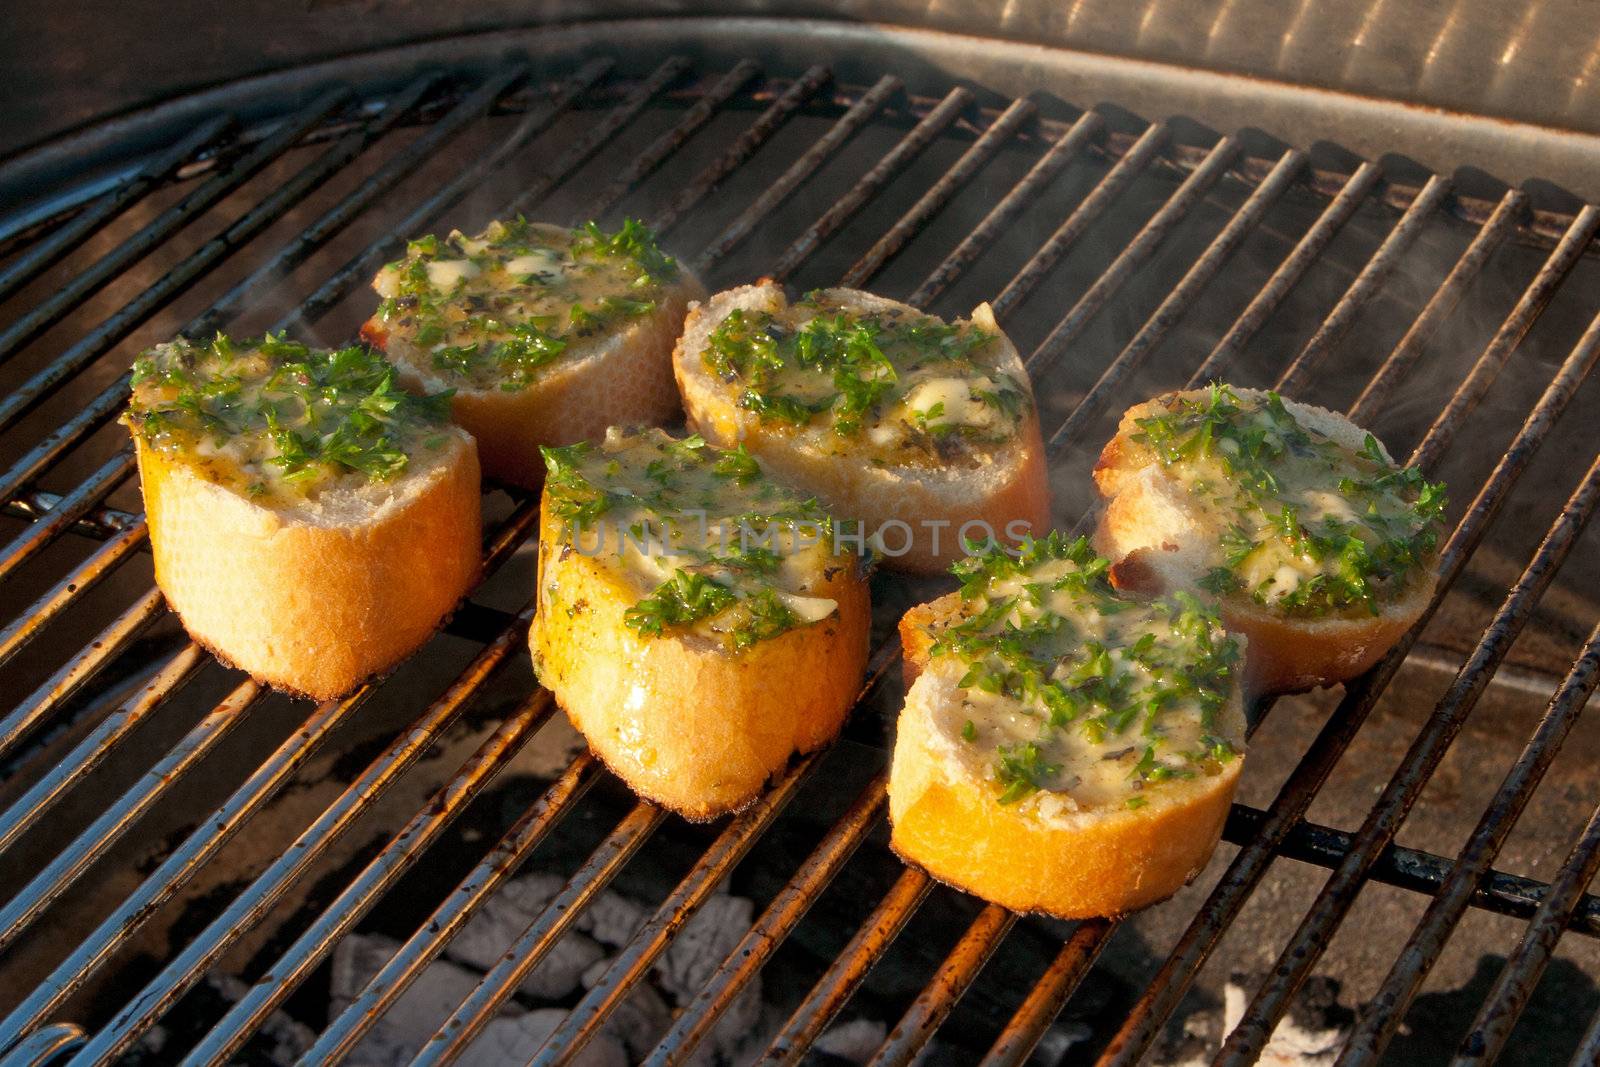 Garlic Breads on a Barbecue by Kartouchken